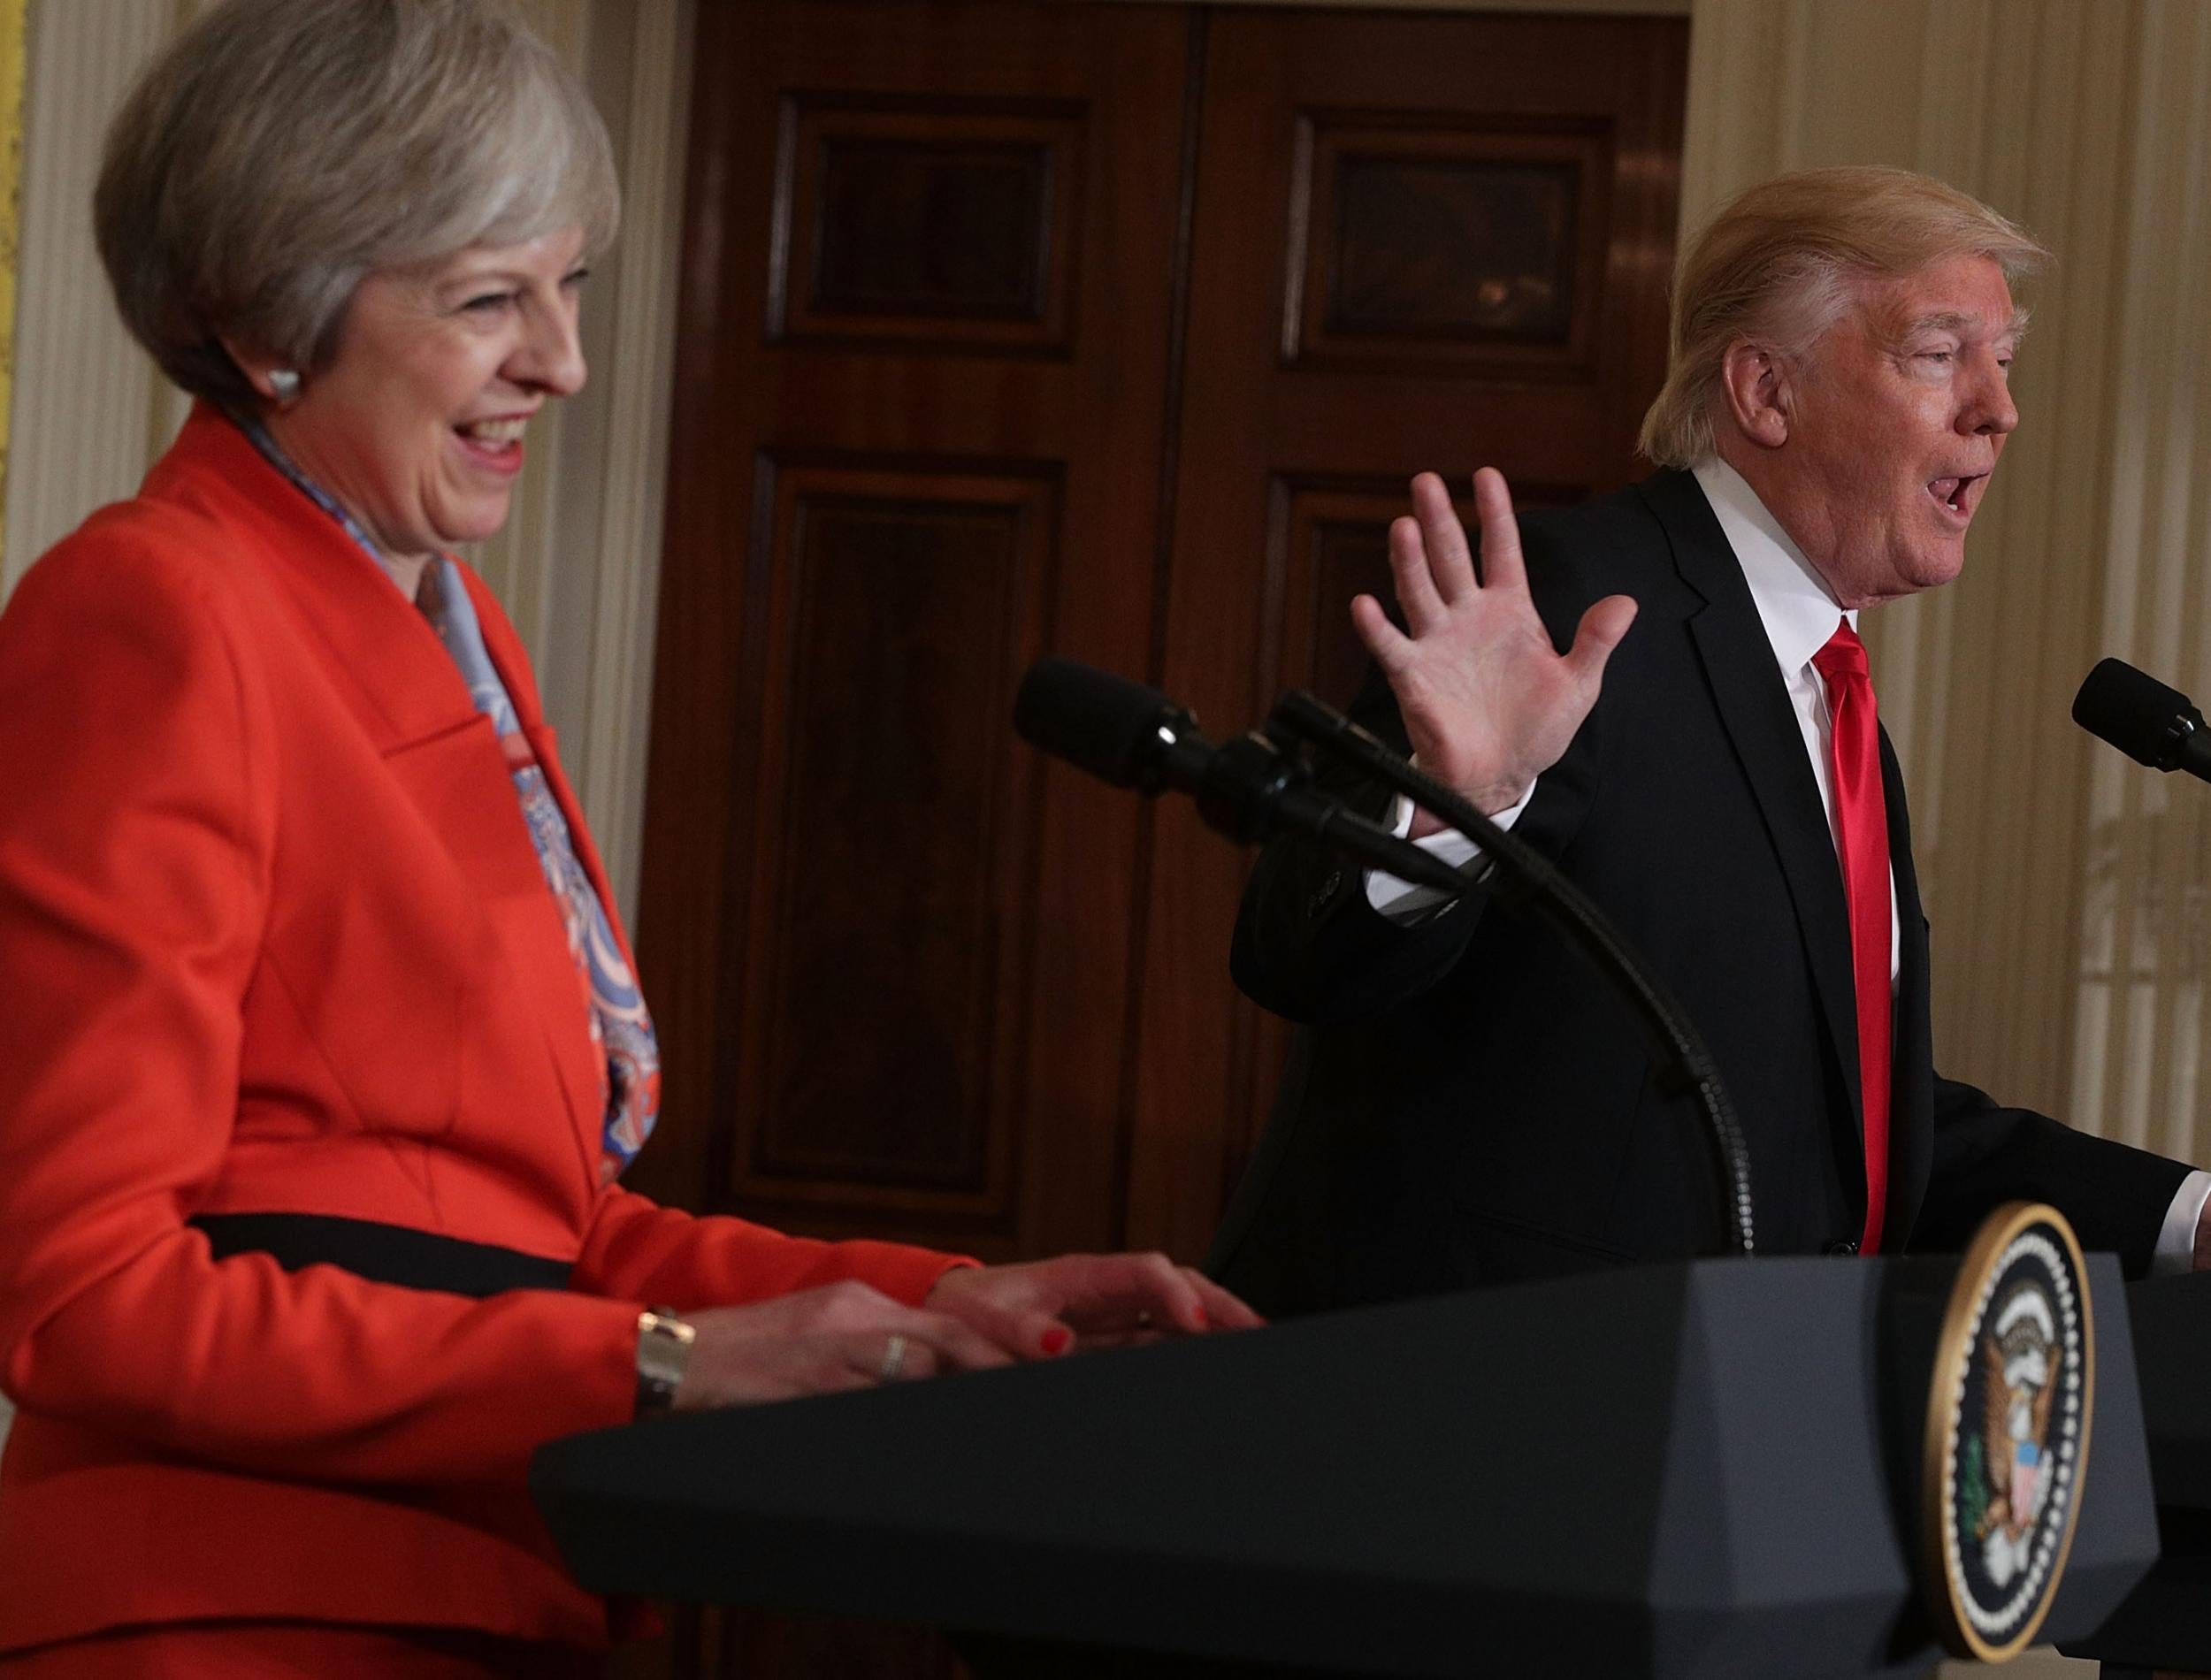 British Prime Minister Theresa May and US President Donald Trump during Ms May's visit to the United States in January 2017